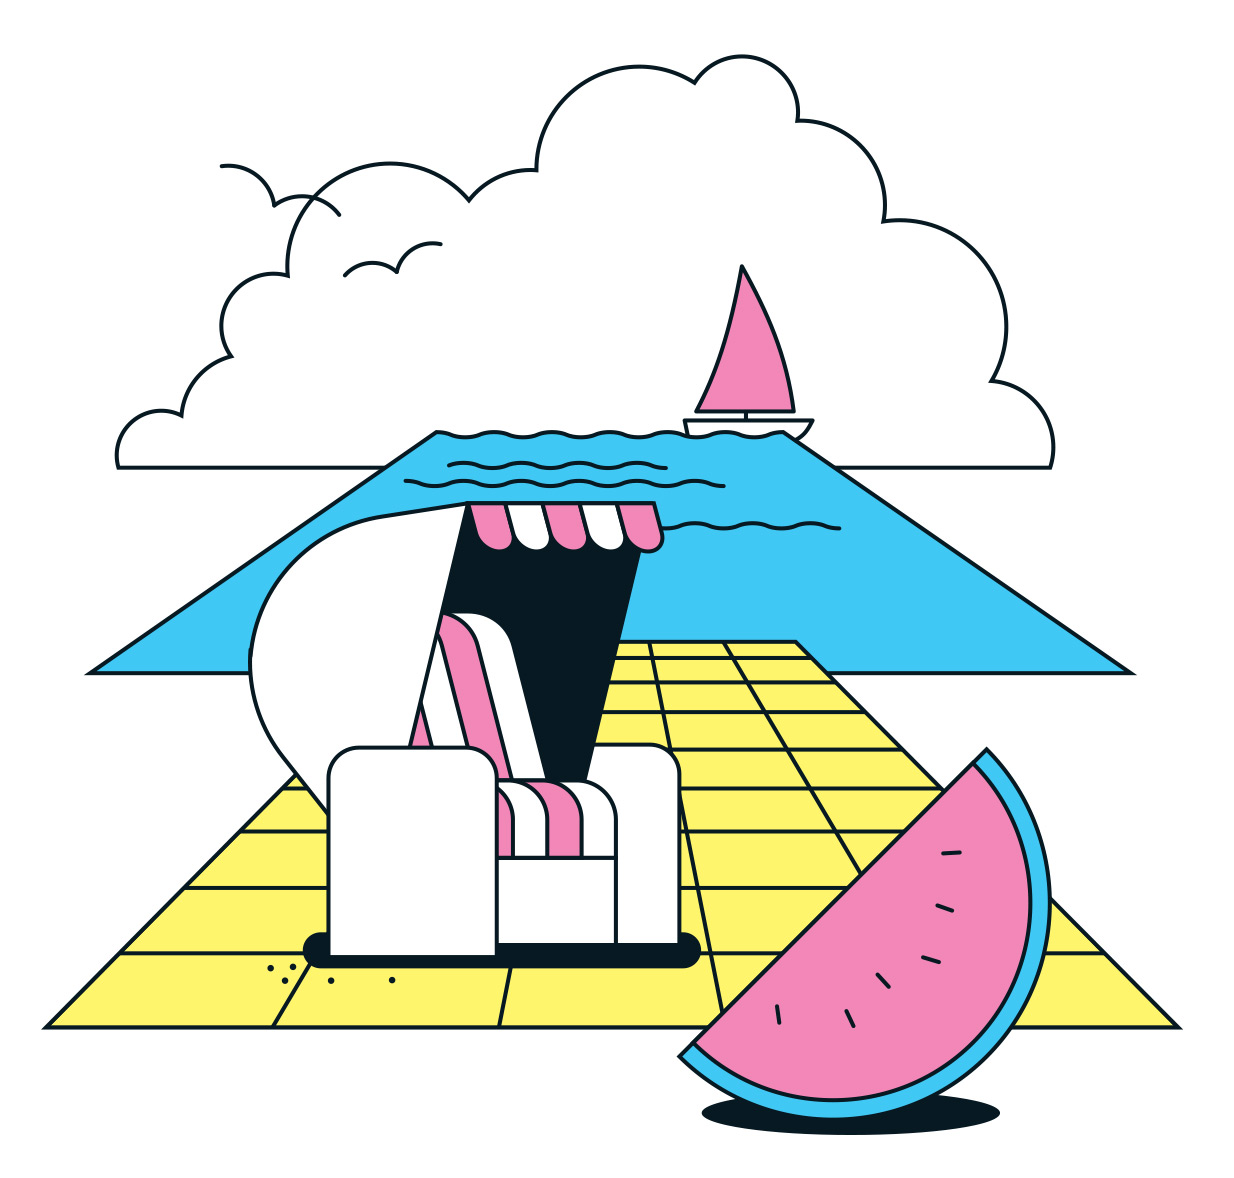 Abstract beach scene with melon and seagulls in retro style. Illustration by Axel Pfaender for Deutsche Bahn.